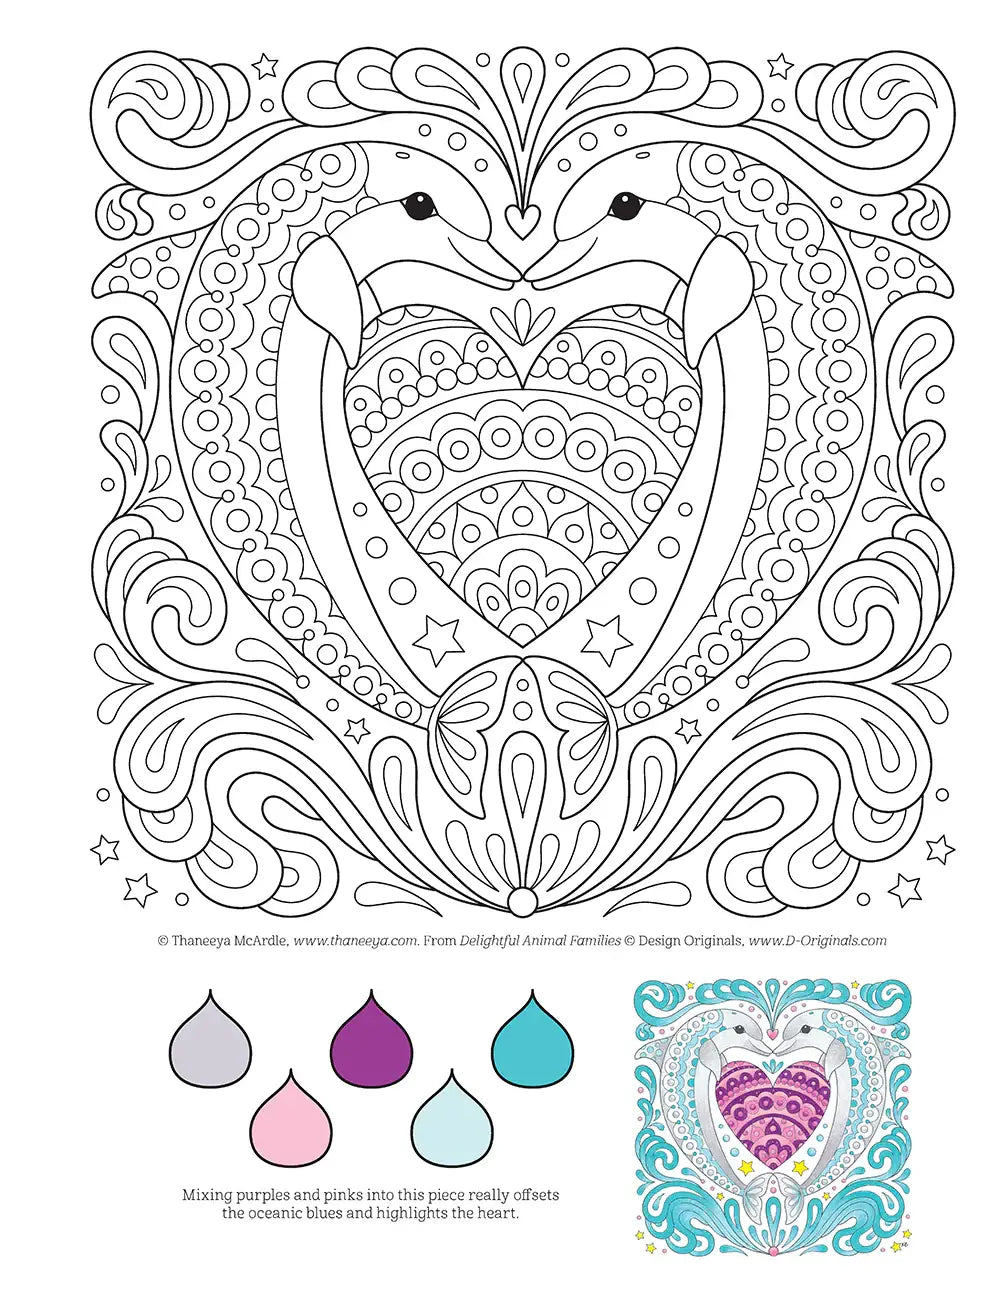 Coloring Book - Delightful Animal Families